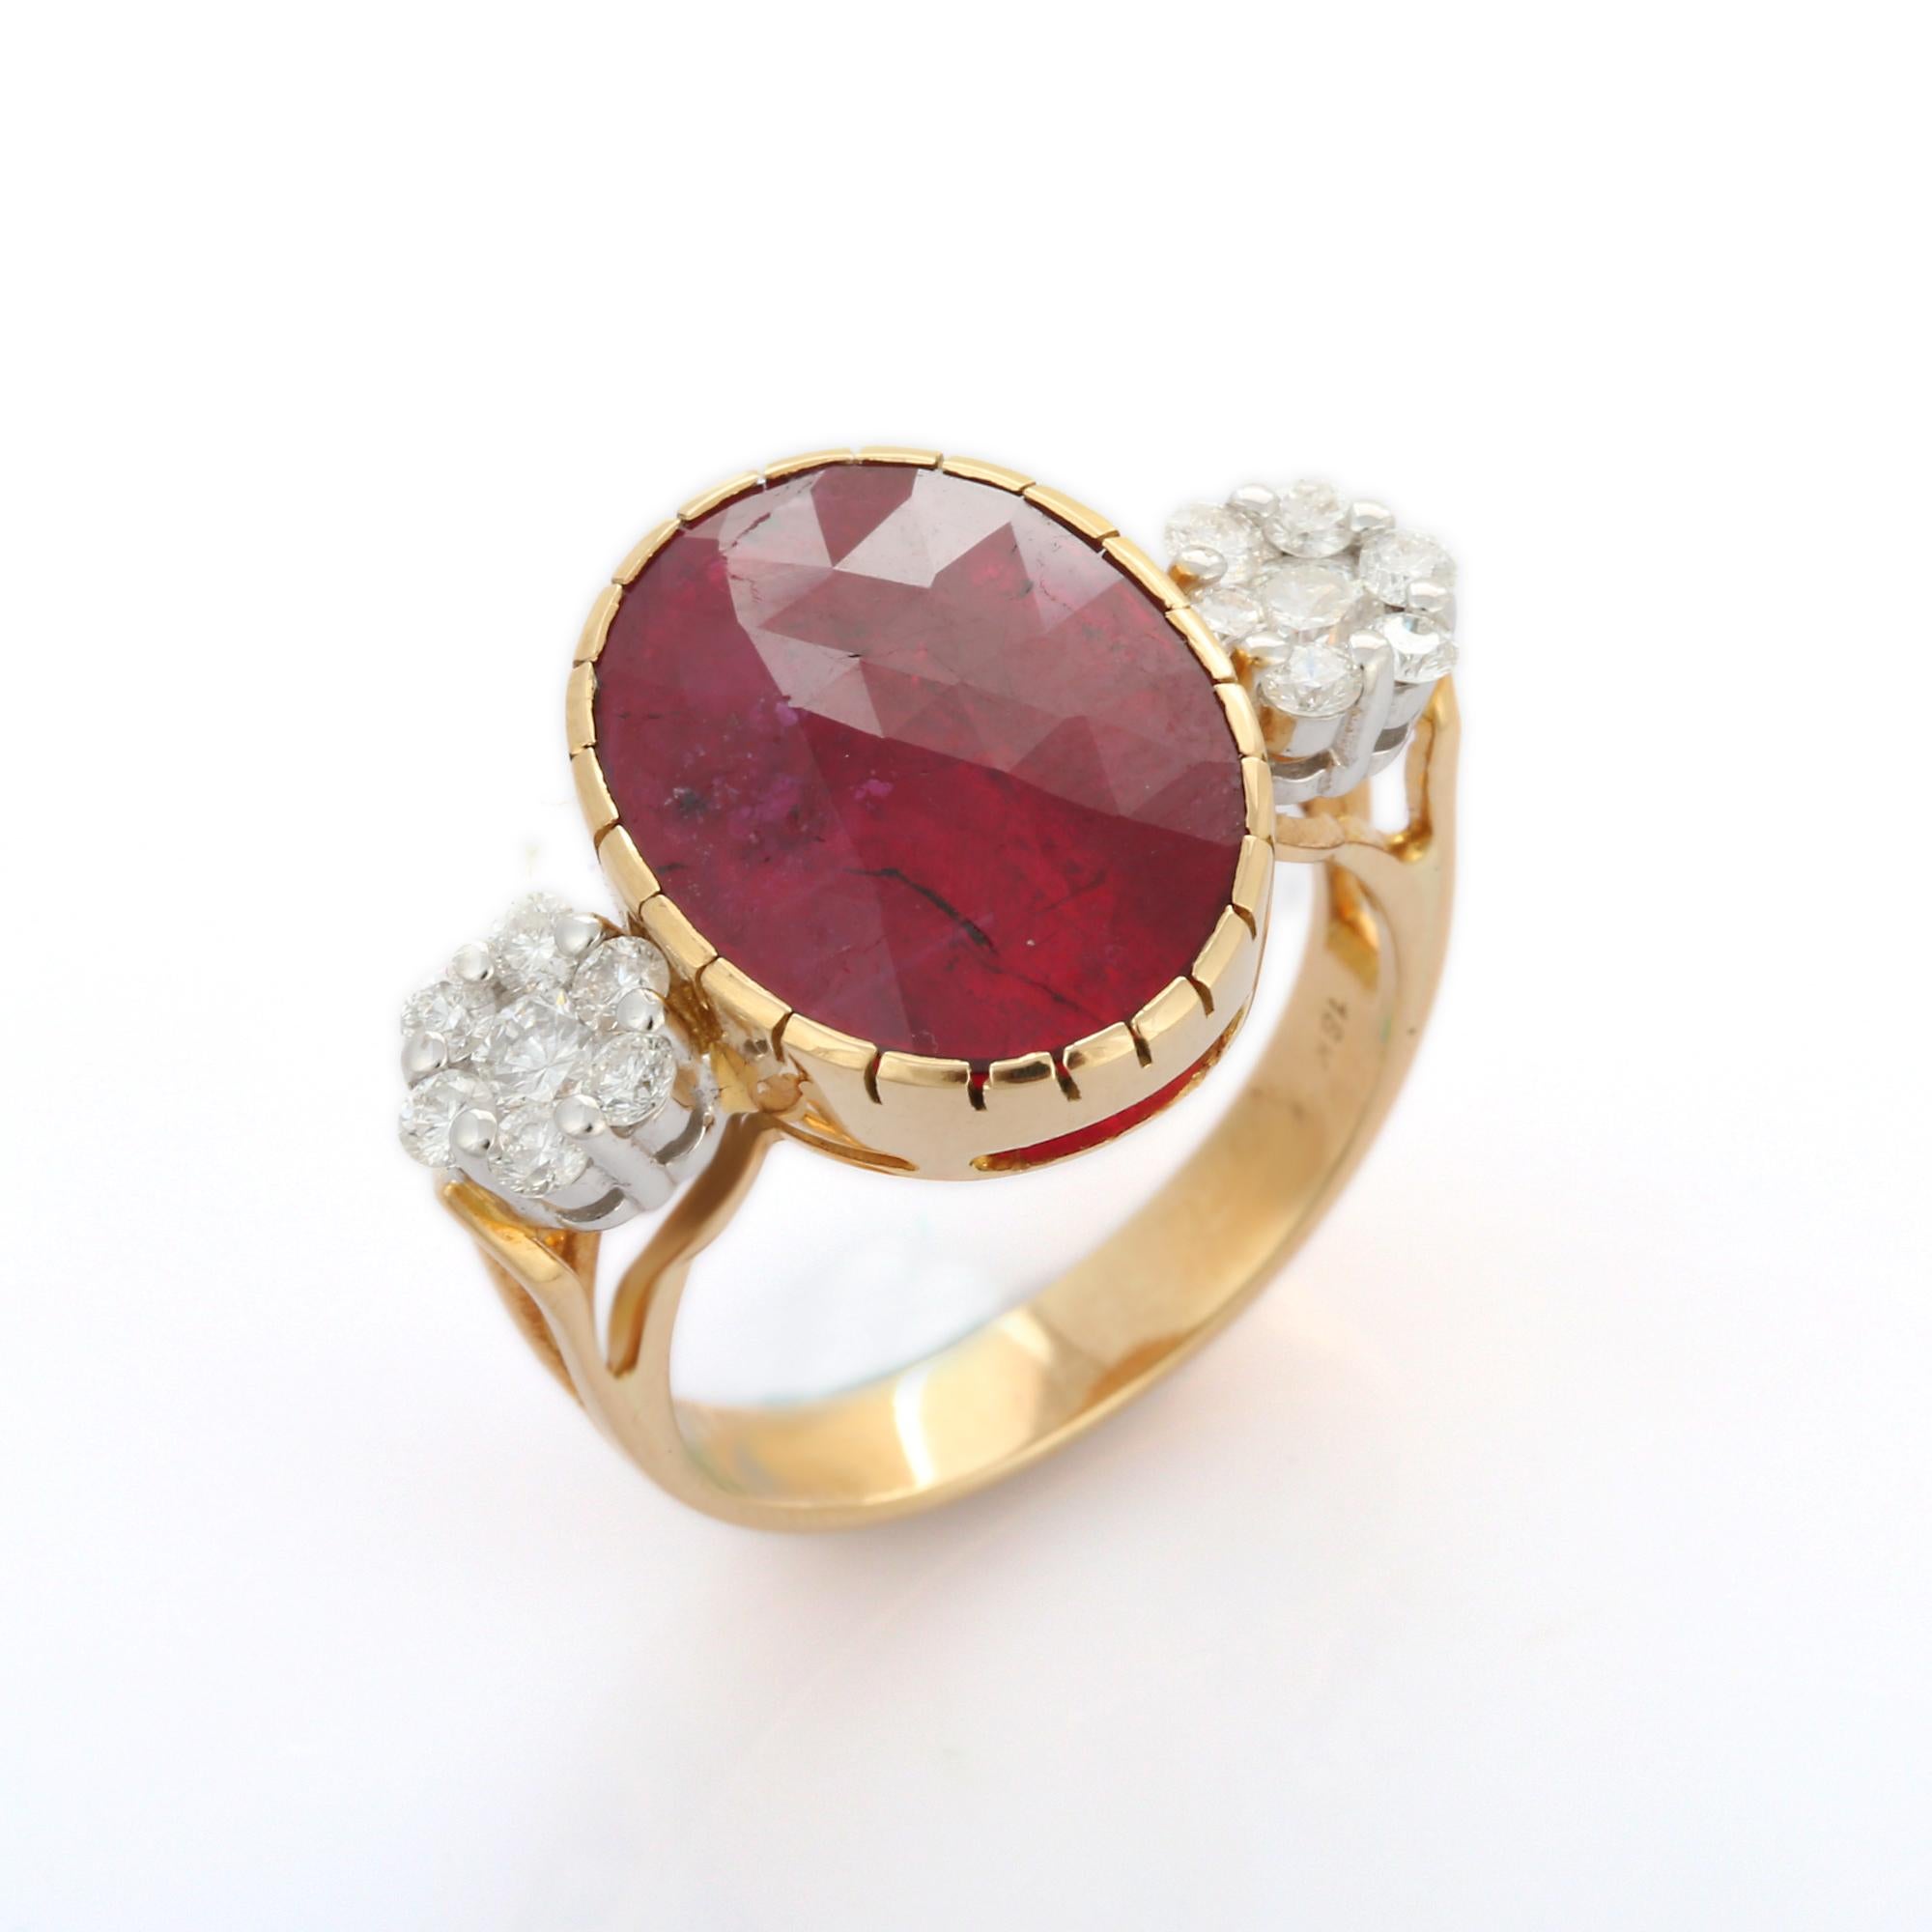 For Sale:  2.65 Carat Oval Cut Ruby Diamond Engagement Ring in 18 Karat Yellow Gold 7